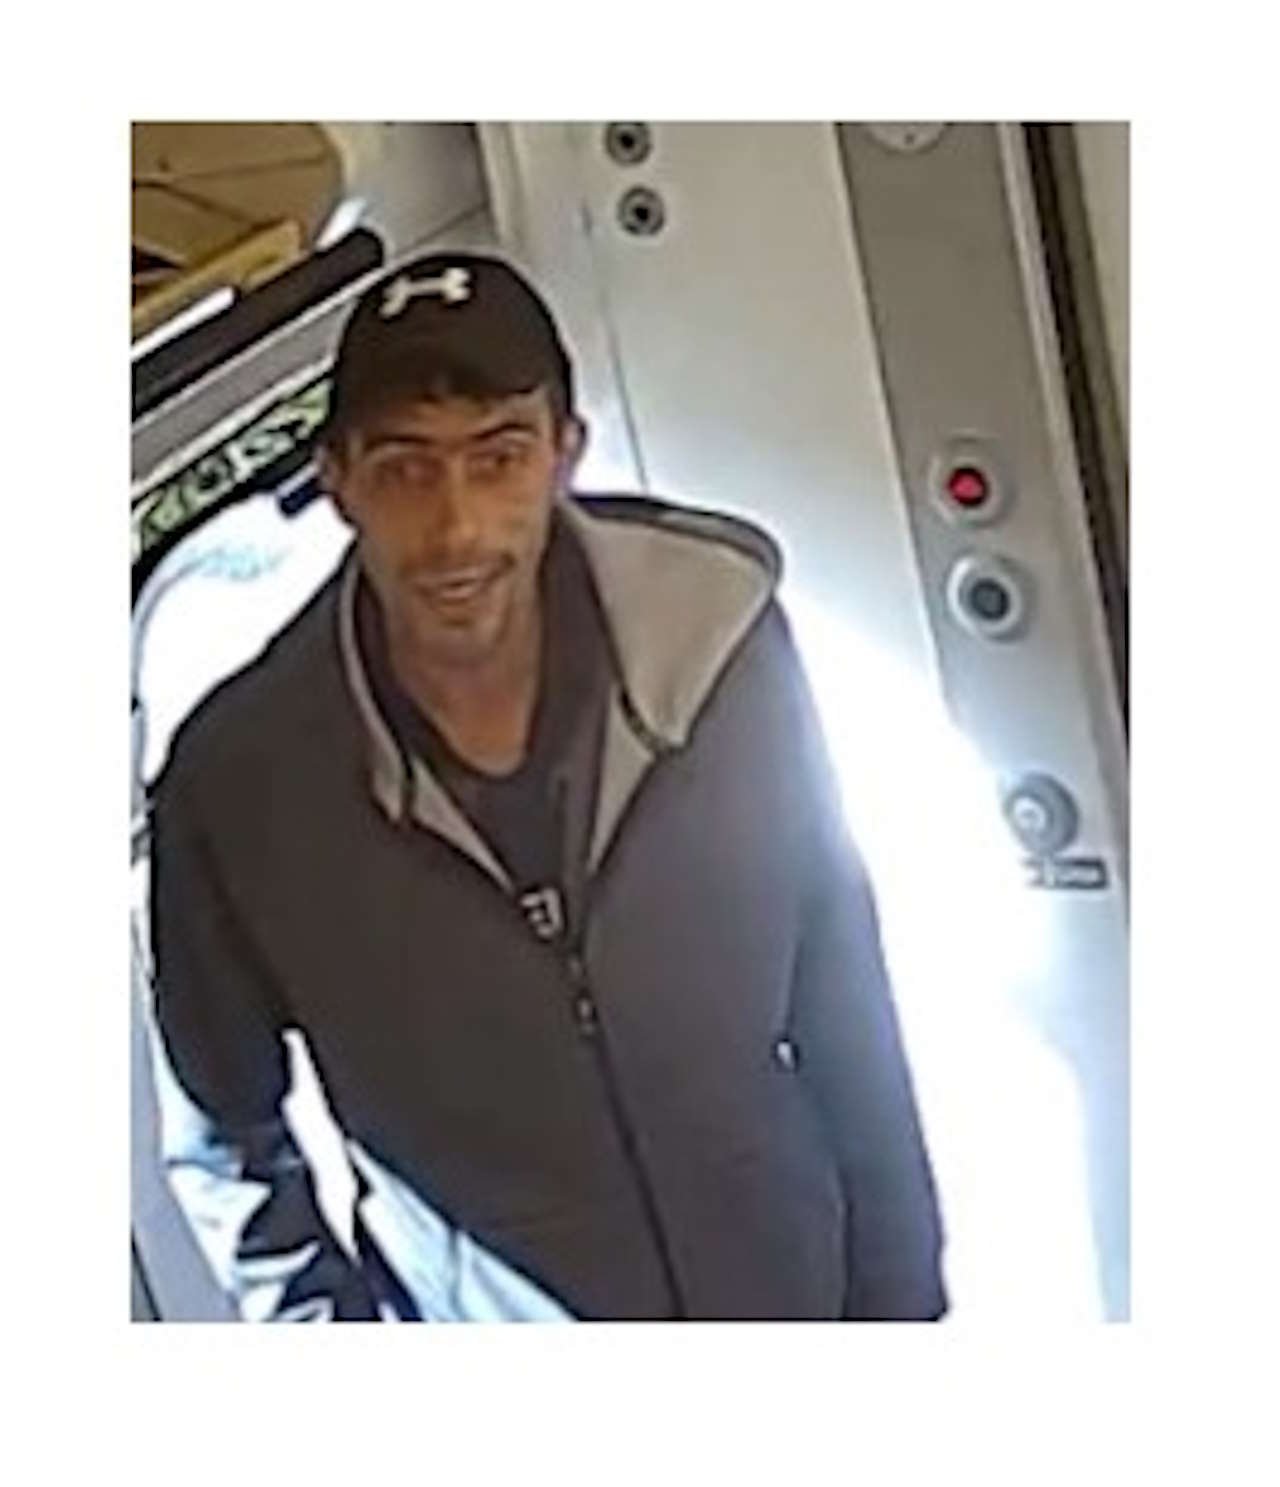 Police Release Image After Vicious Assault On Train In Birmingham